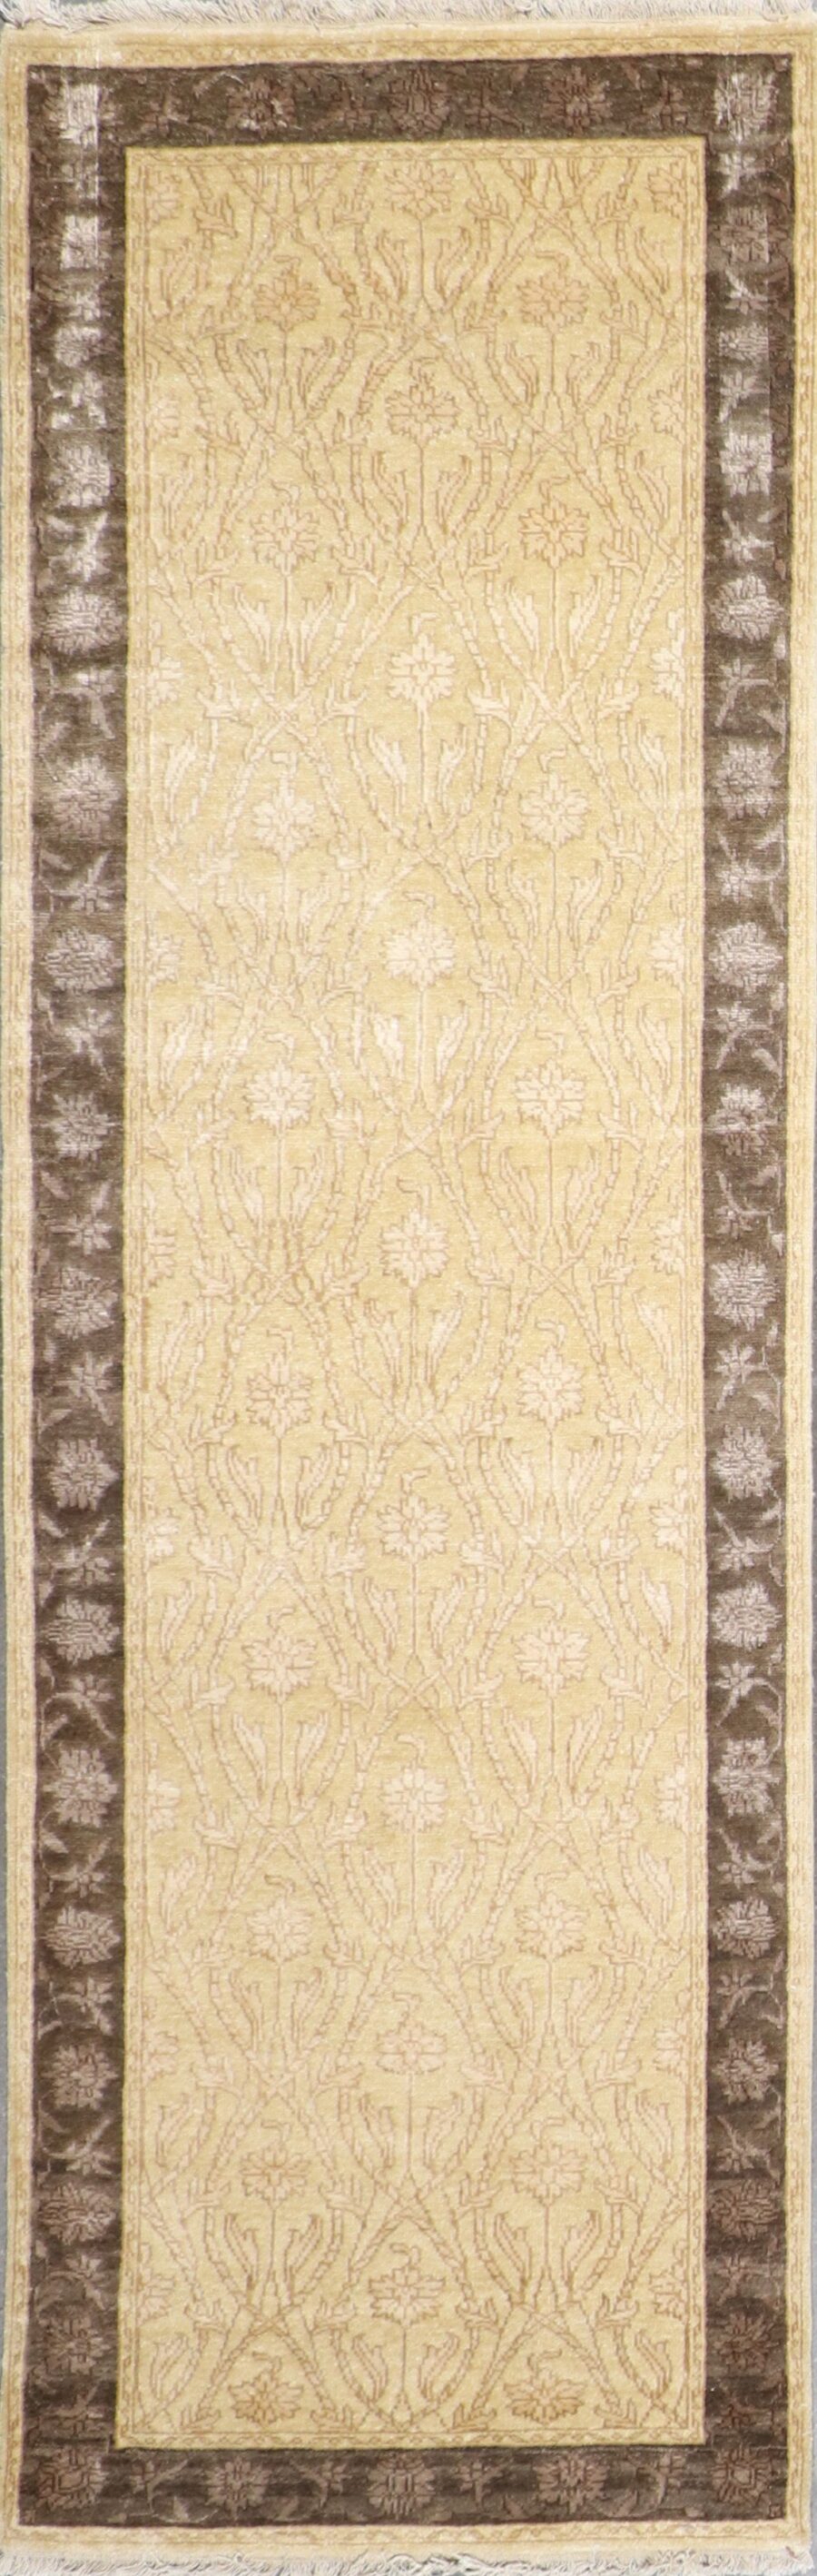 2’7”x10’ Decorative Tan Wool & Silk Hand-Finished Rug - Direct Rug Import | Rugs in Chicago, Indiana,South Bend,Granger